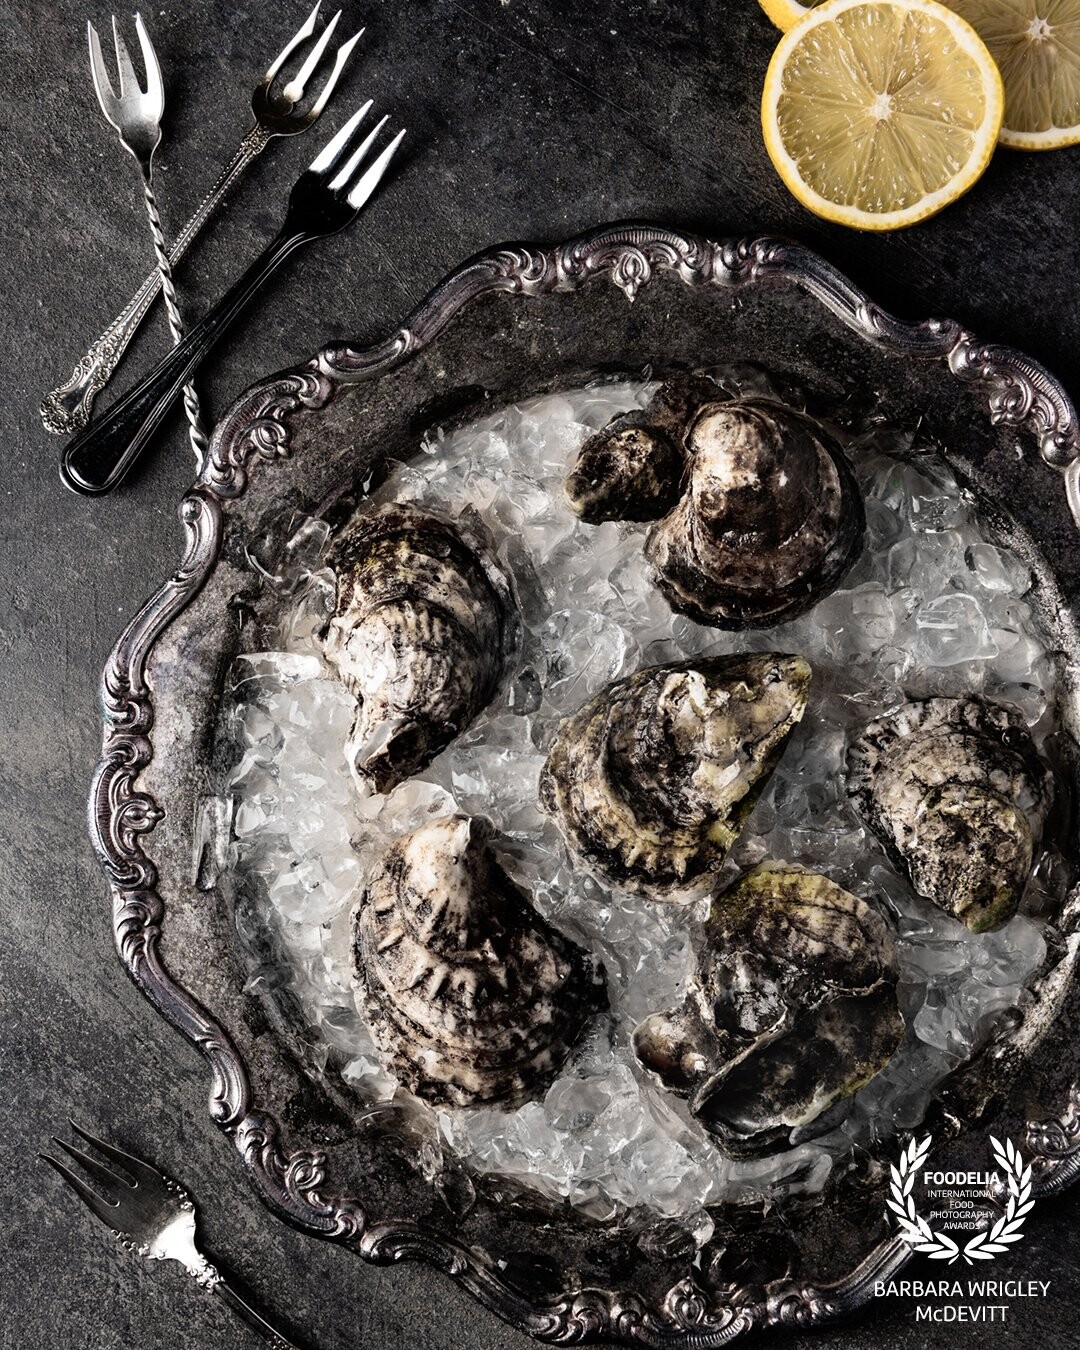 Oysters are one of my favorite subjects to photograph - with all their texture they are so photogenic.  I wanted to create a monochromatic color scheme and displayed these oysters in an antique silver platter that complemented the grey color of the oysters.  I chose a dark grey background and used antique seafood forks to carry through on the color scheme.  A touch of color was added by the lemons to break up the monochromatic color scheme.